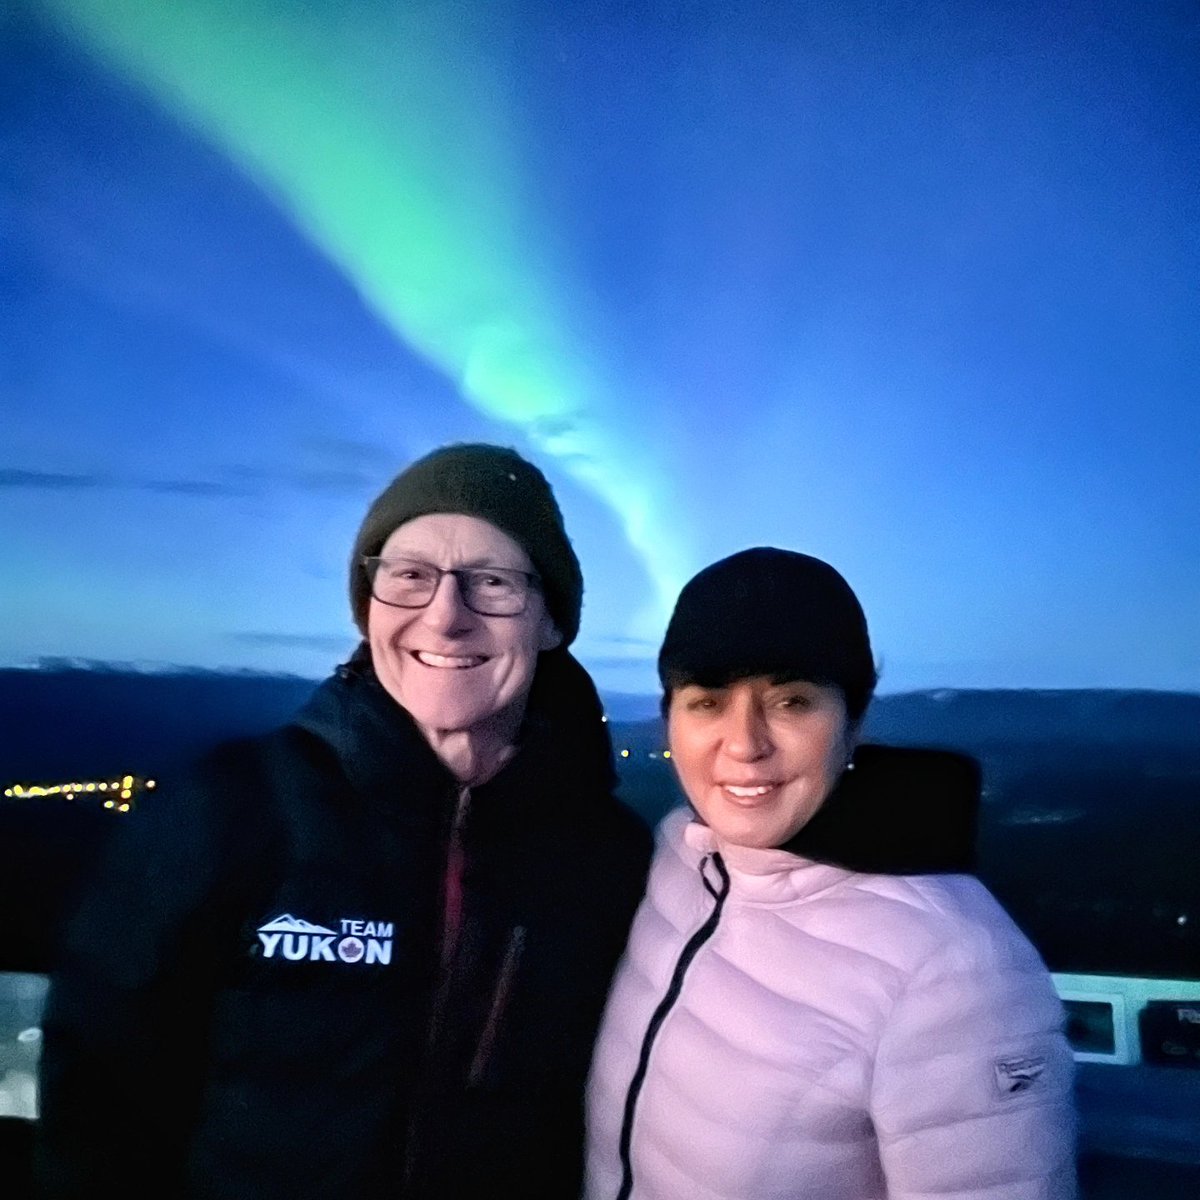 Canadian achievement unlocked! ✅️🇨🇦 Thanks to @drbrendanhanley, Danielle, and Eryn for showing me the Northern Lights. This should be on every Canadian’s bucket list! 🌌